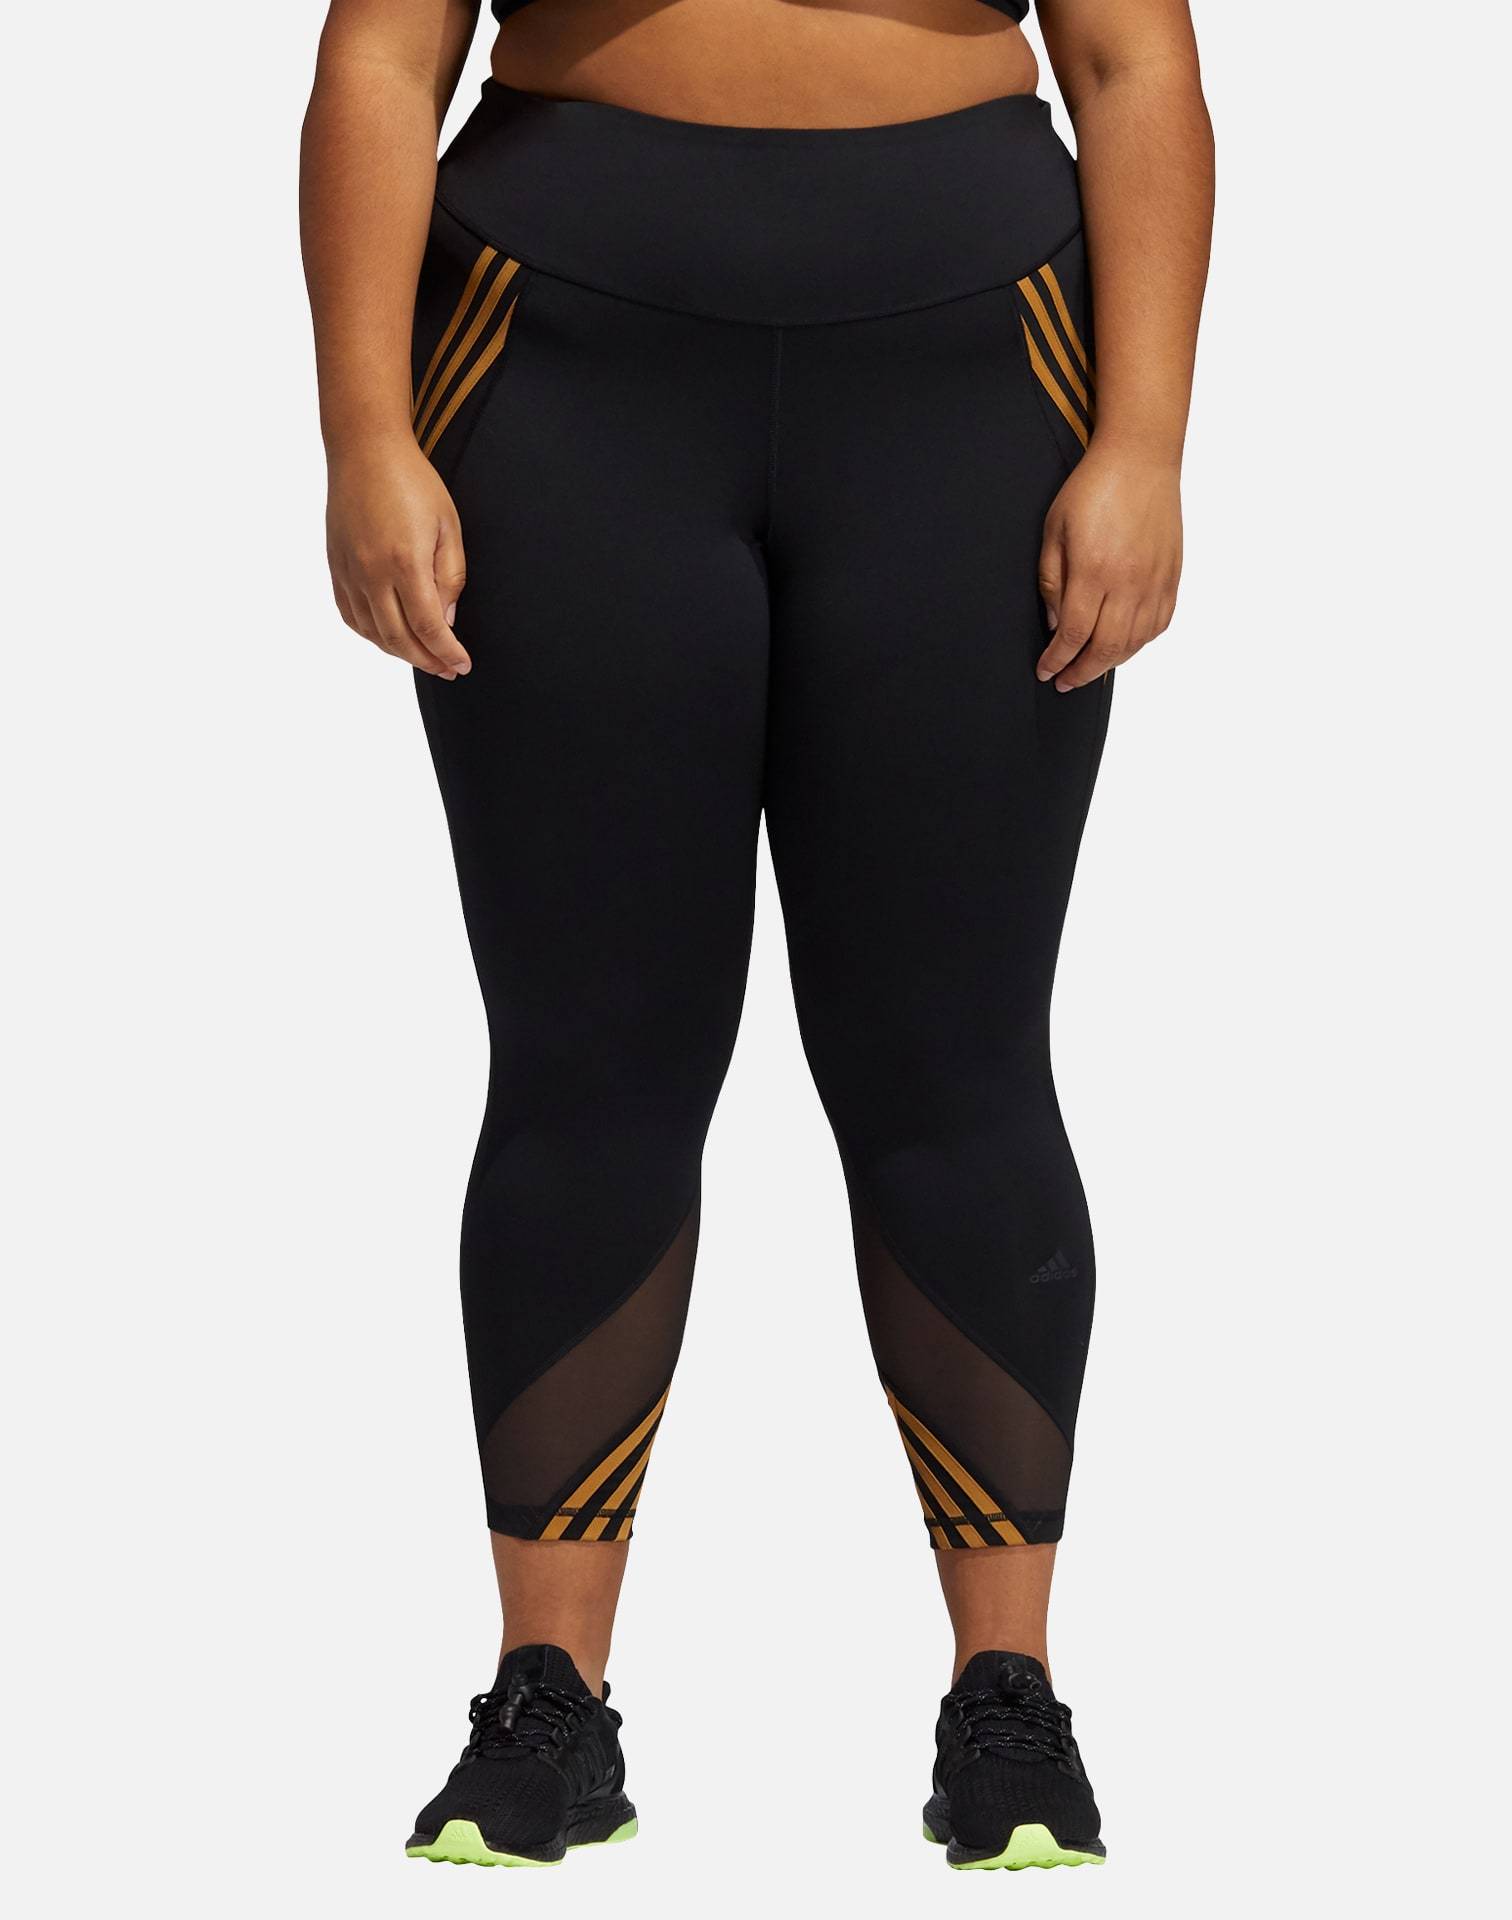 Adidas IVY PARK 3-STRIPES TIGHTS (PLUS SIZE) – DTLR